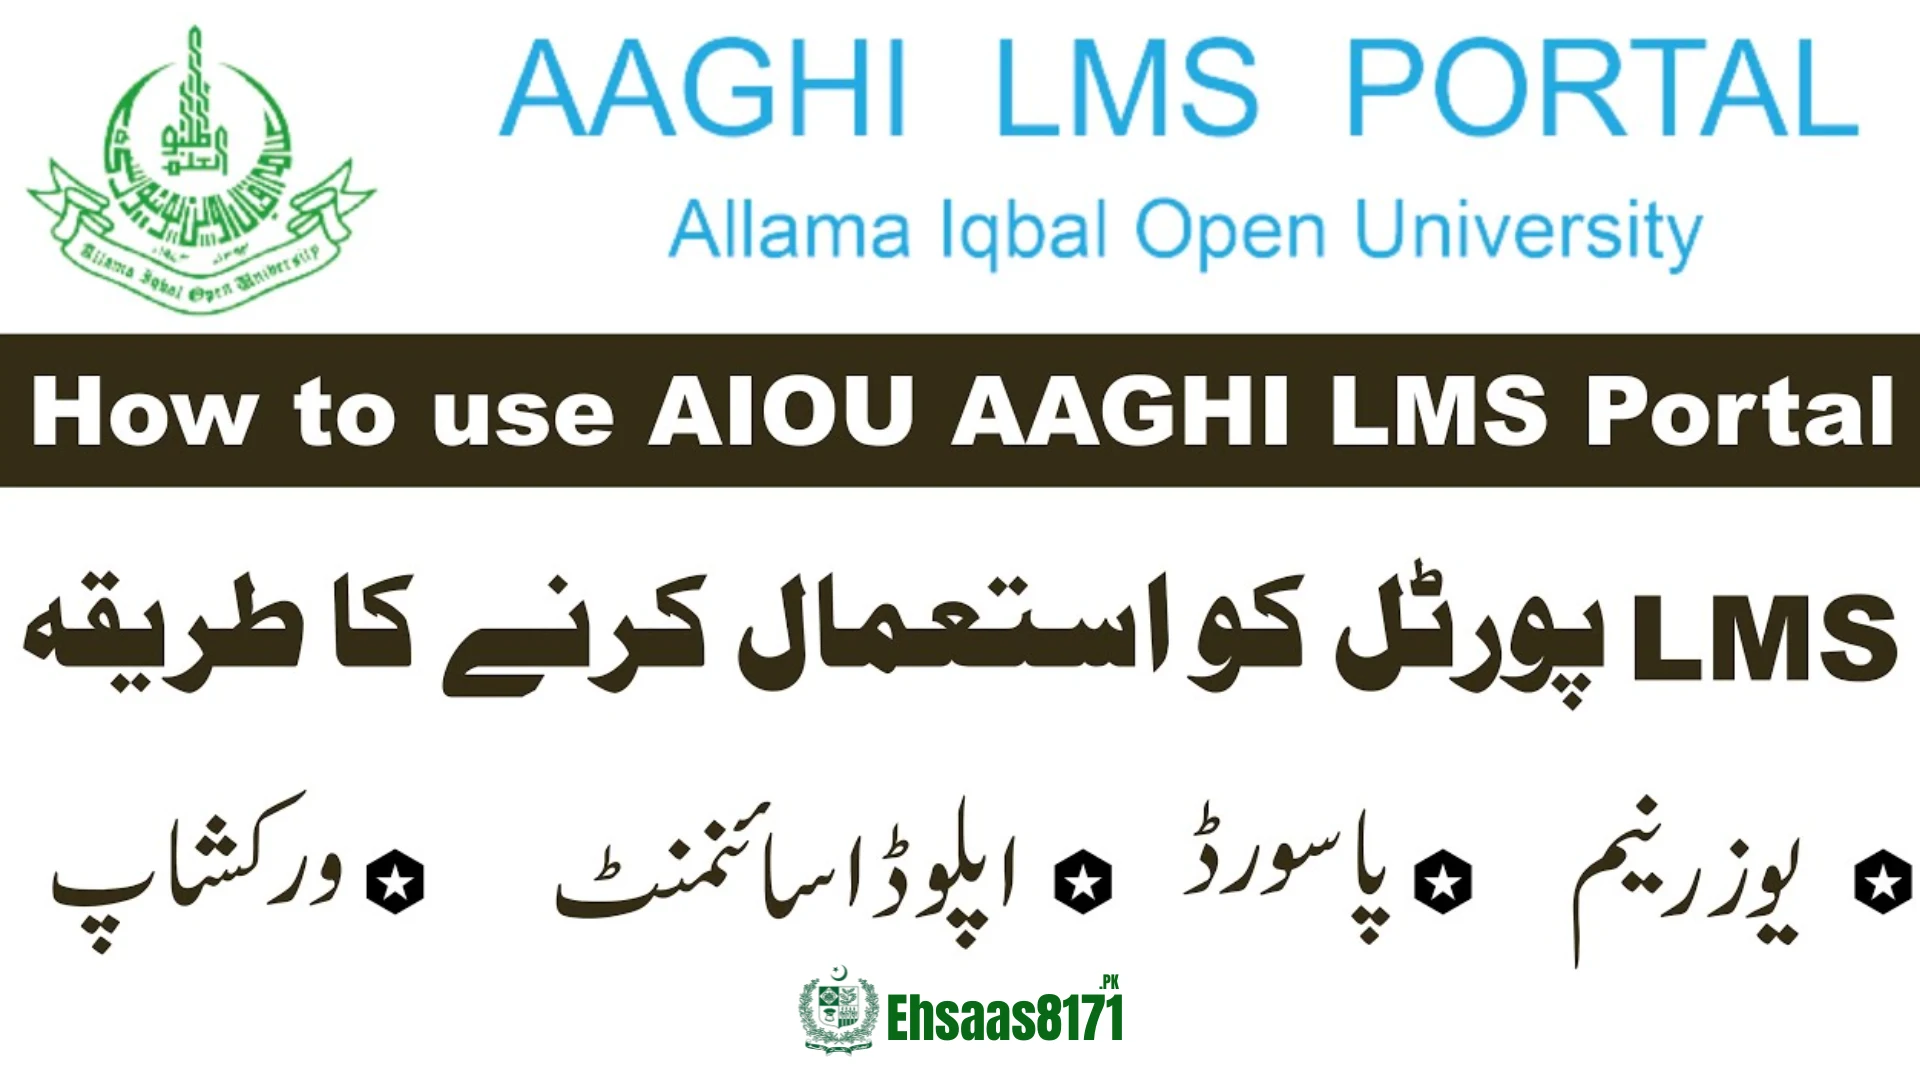 Procedure to Access AAGHI LMS Portal for AIOU Students